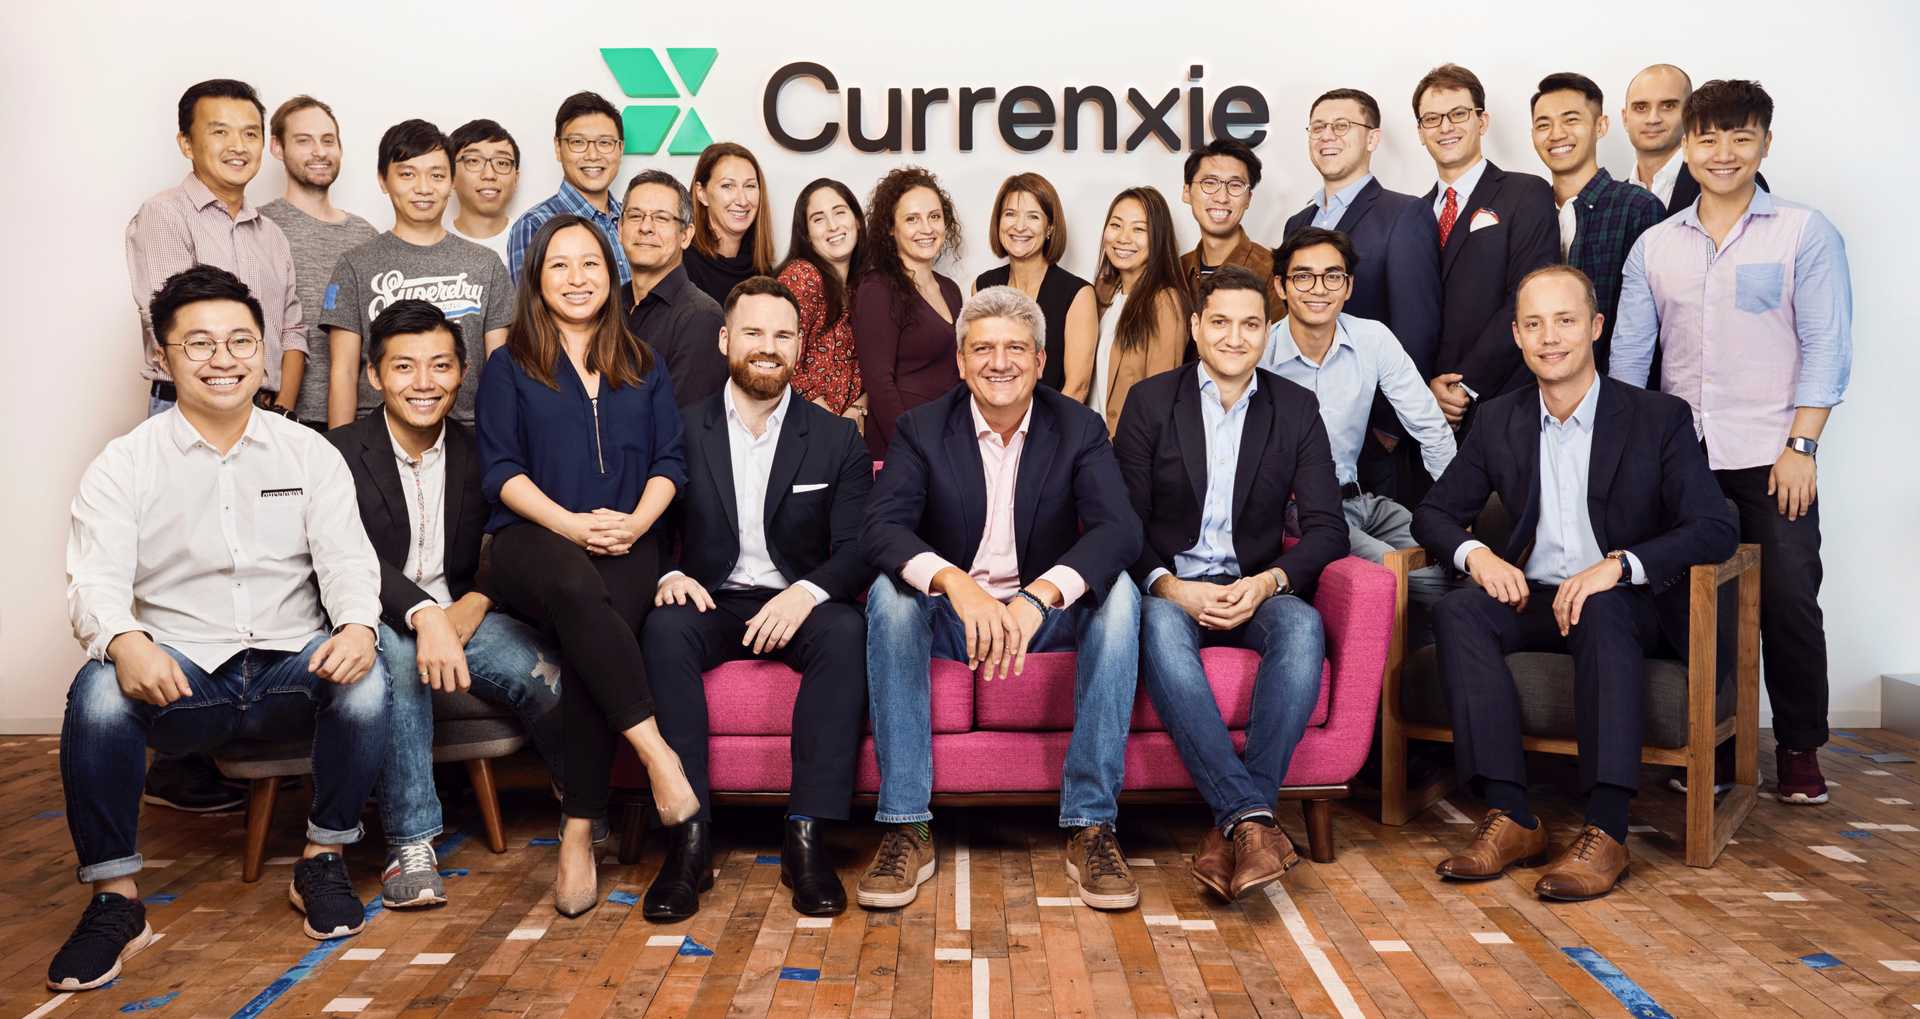 Currenxie Limited team, Currenxie Limited團隊, Currenxie Limited团队